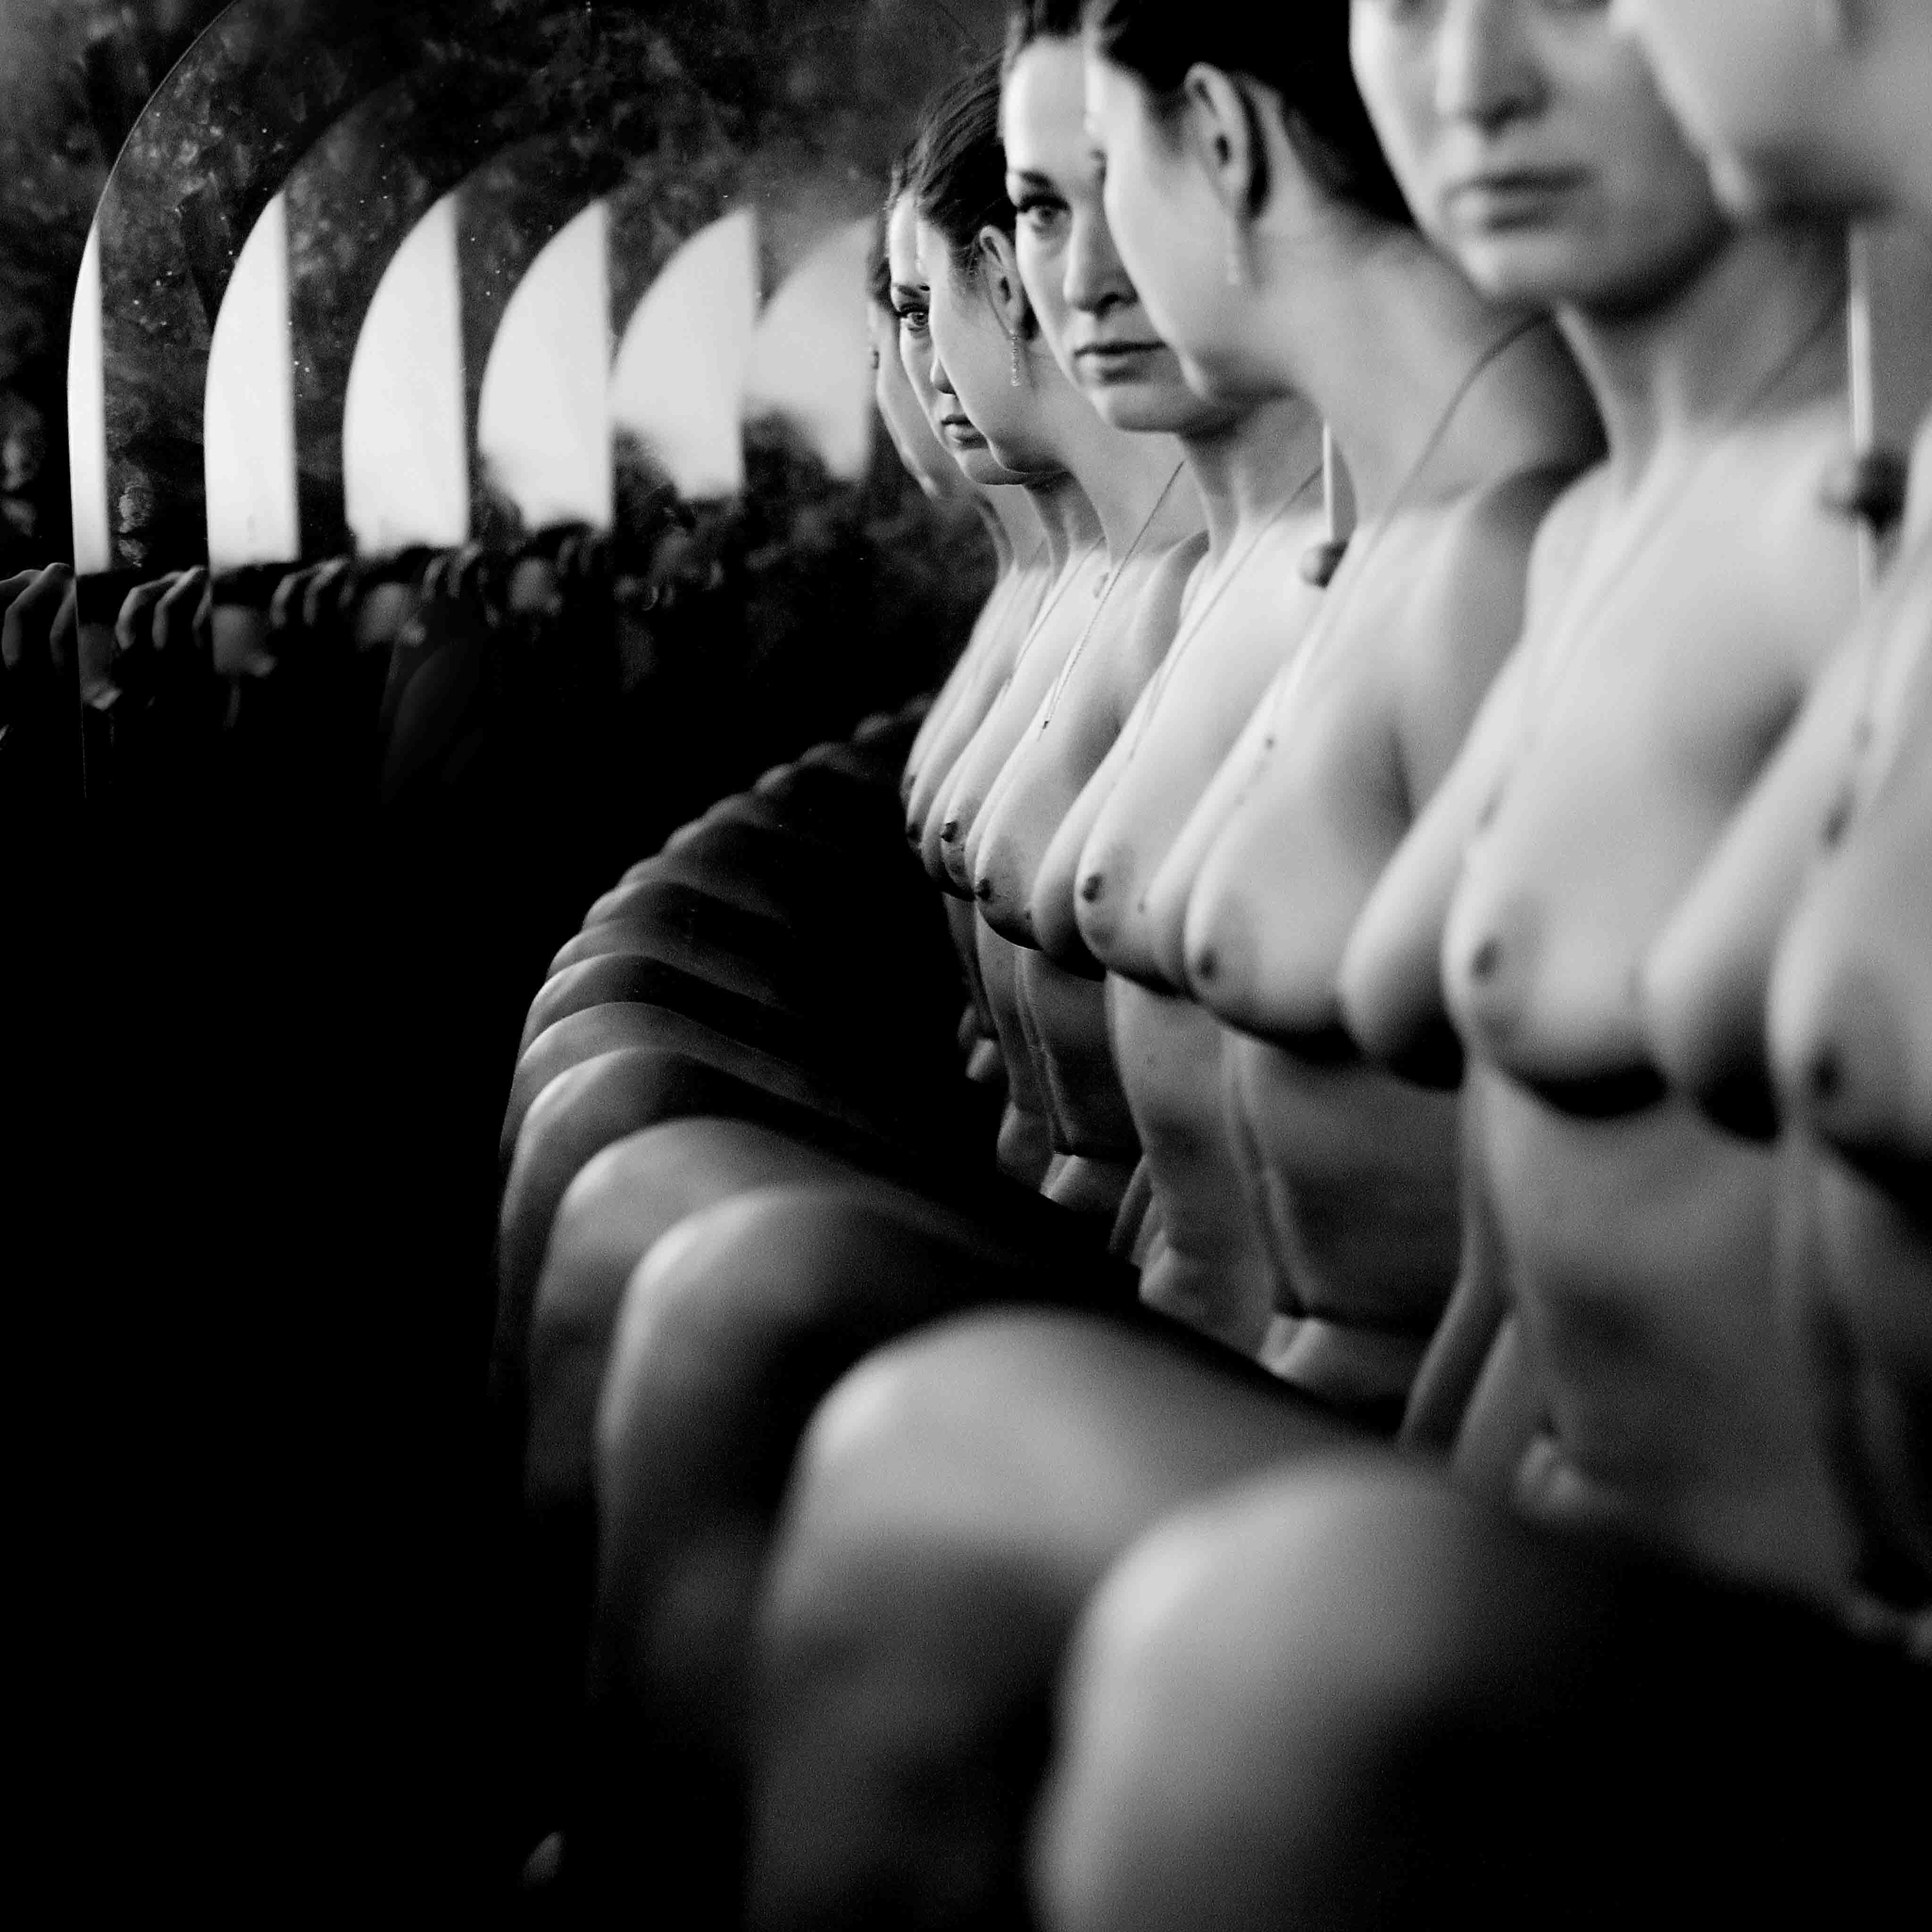 "Mirrors" Photography 39" x 39" inch Edition 1/3 by Olha Stepanian

Printed on Epson Professional Paper
Signed and numbered by the artist 

Not framed. Ships in a tube. 

Available sizes:	
Edition of 15:	24" x 24" inch
Edition of 7:	31" x 31"